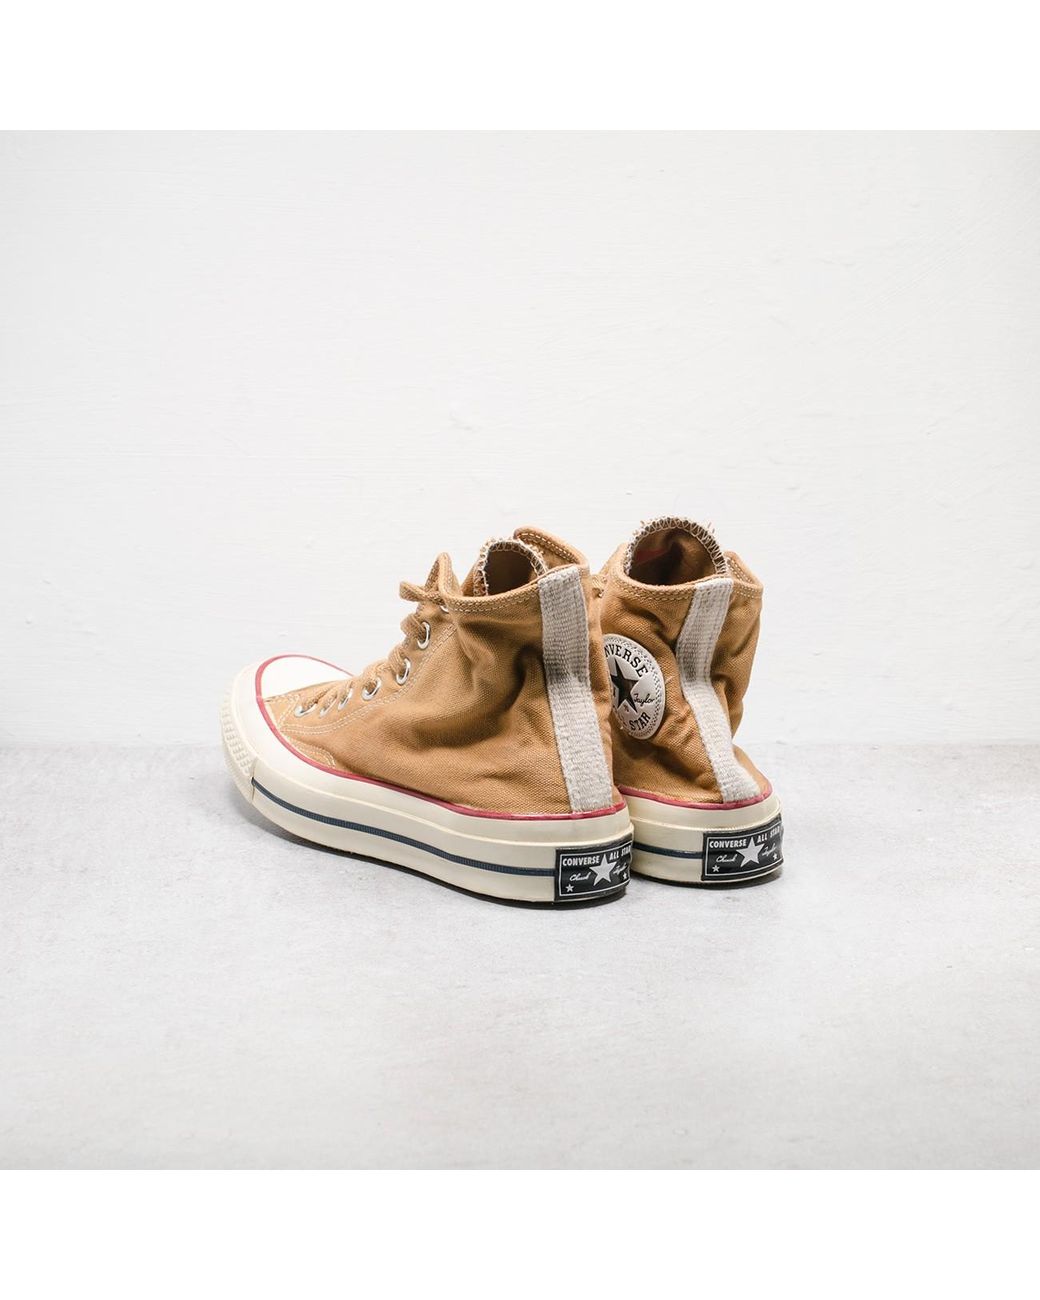 Converse Coffee Dye Chuck Taylor Ox 70s Canvas Shoes for Men | Lyst